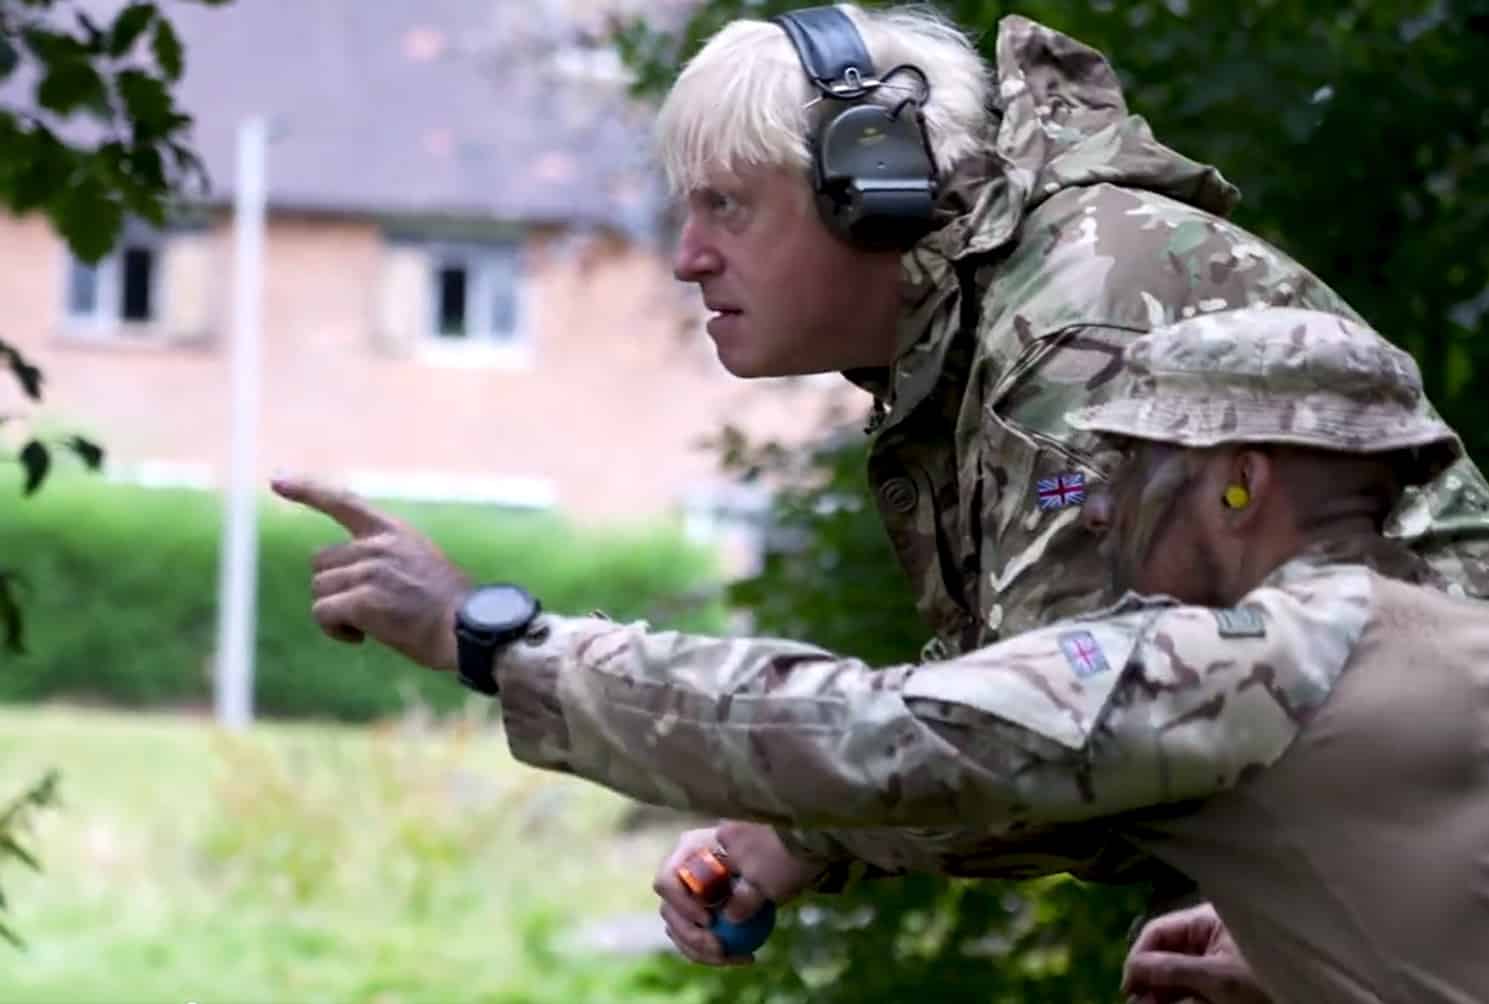 Watch: Boris Johnson’s Action Man cosplay has left people flexing their muscles online